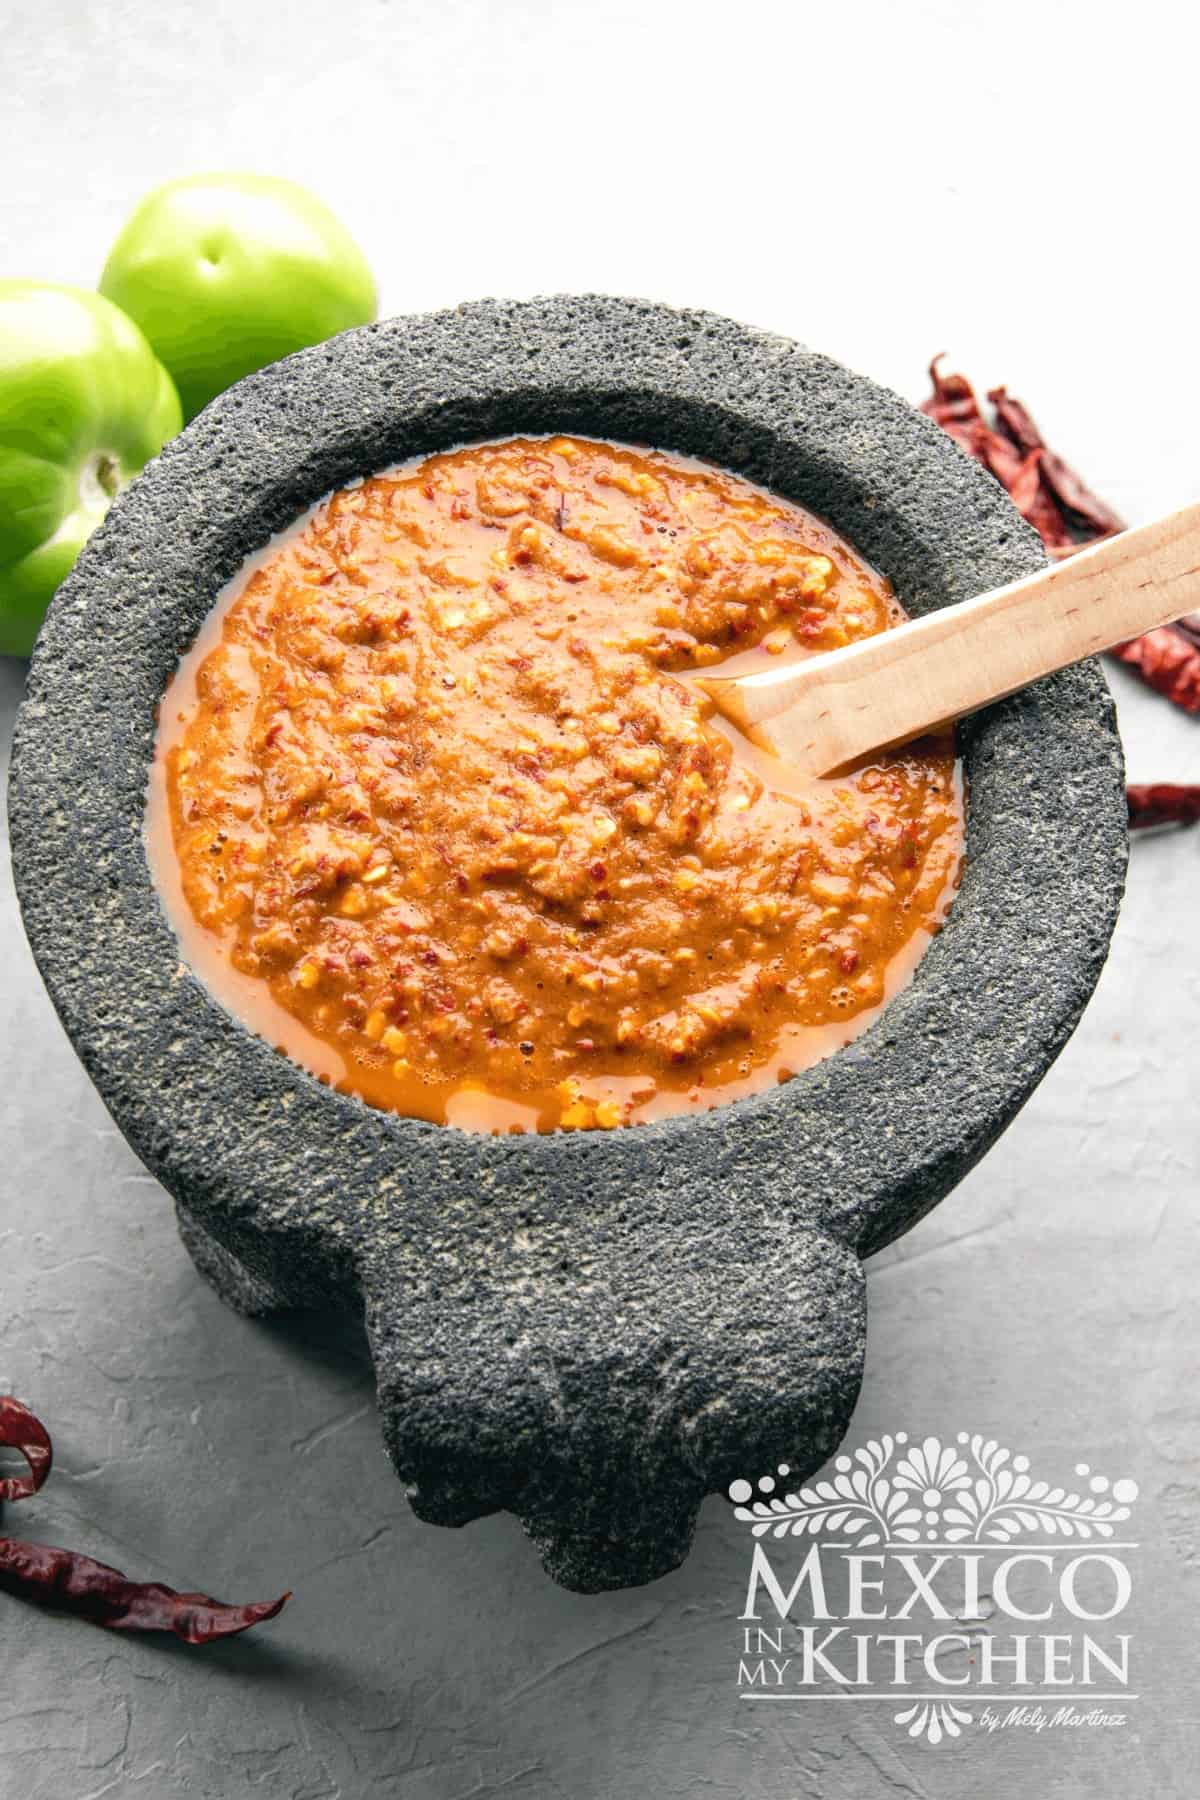 Roasted tomatillos and arbol pepper salsa in a molcajete